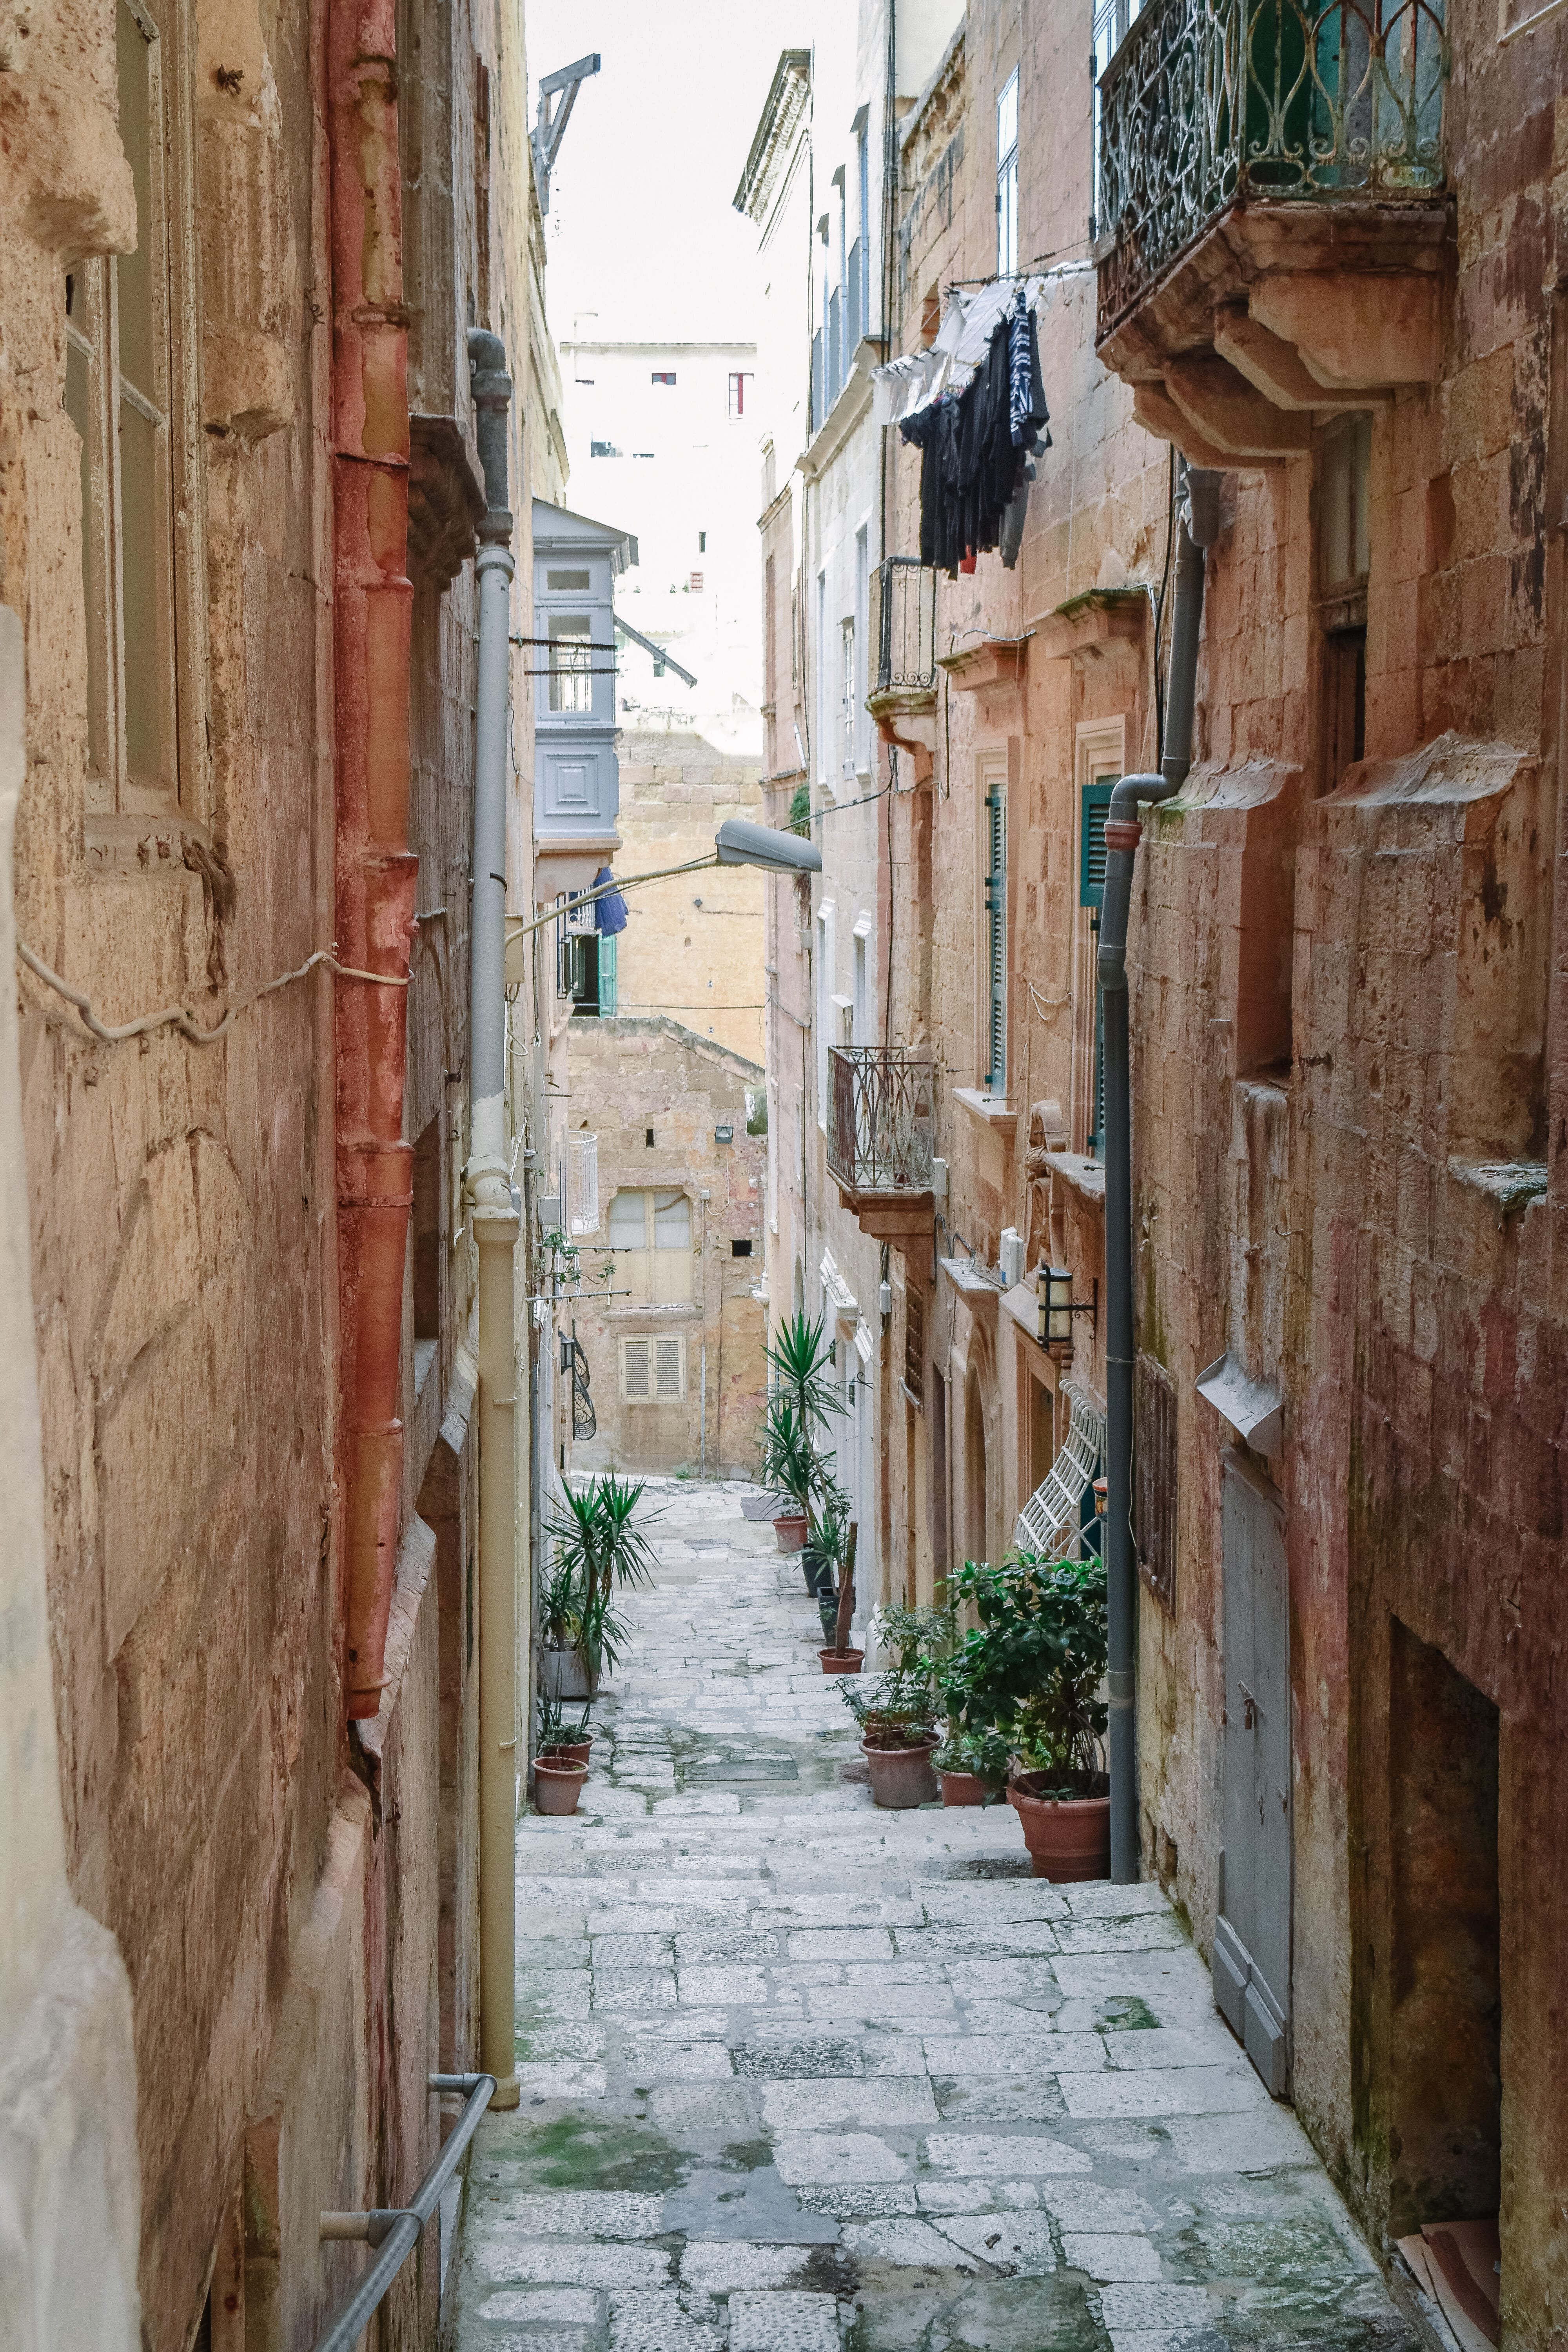 A Beginners Guide To Slow Travel - A Beautiful Alley In Valletta, Malta